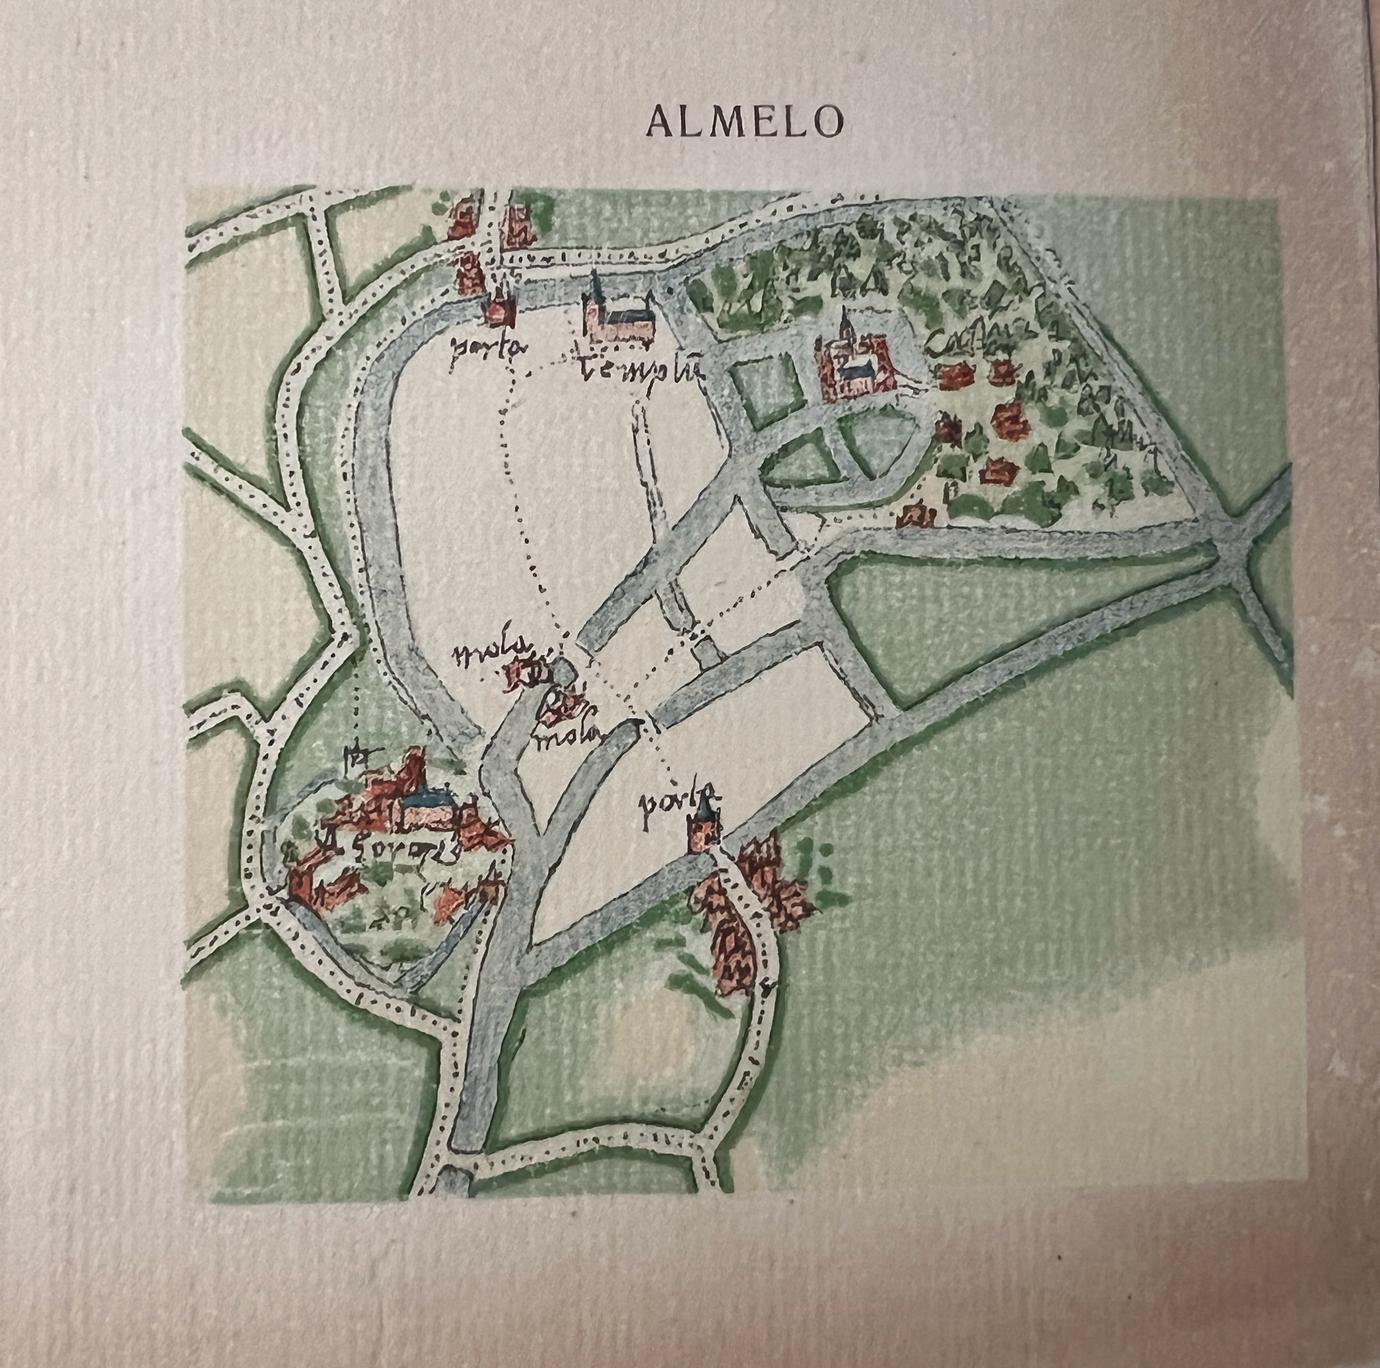  - Modern print 20th century | Modern print on laid paper with city view of Almelo, 1 p.